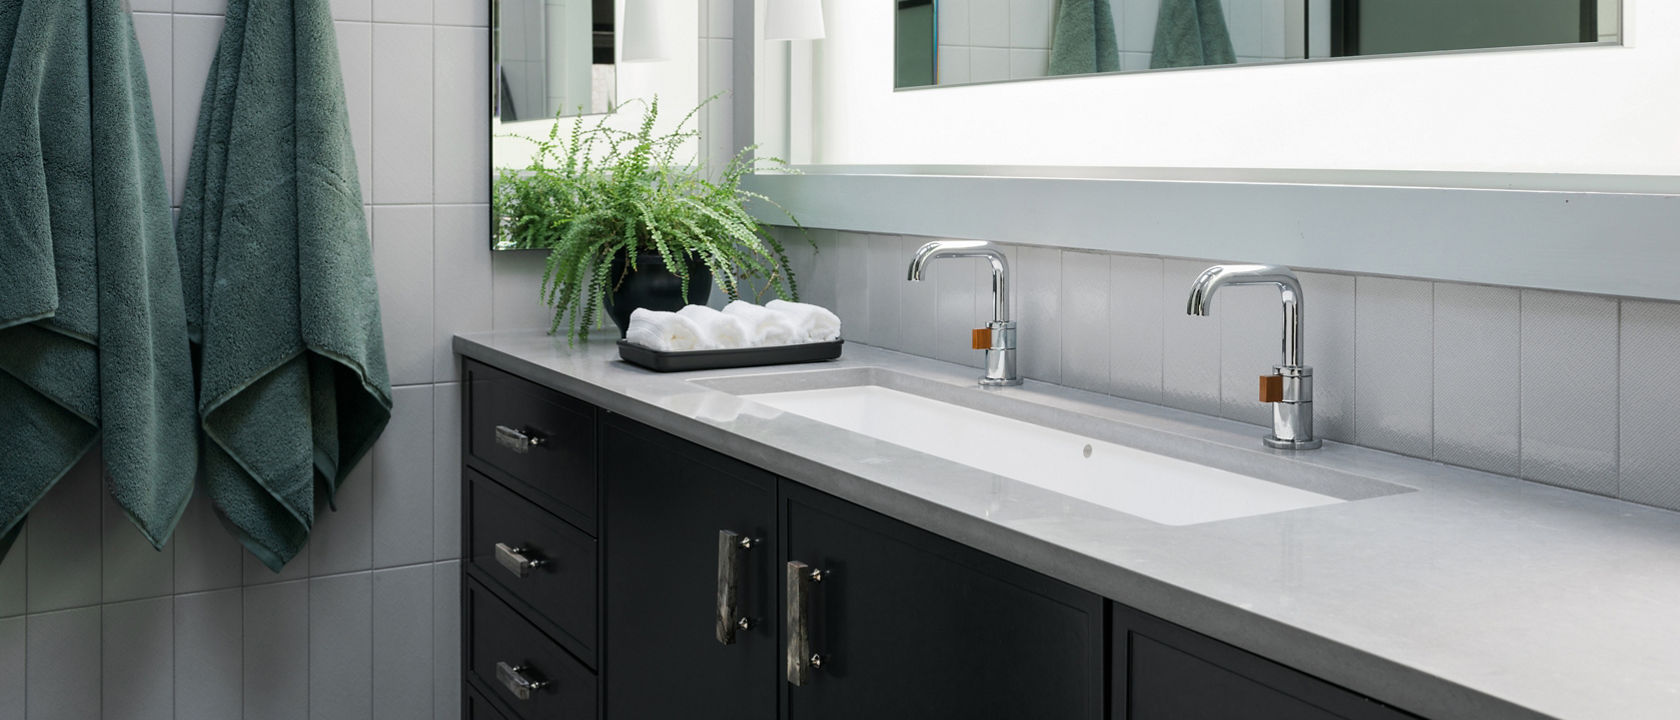 A modern bathroom with a black vanity topped with gray quartz countertops, a double sink, backlit mirror, and two green robes hanging on the gray tiled walls.